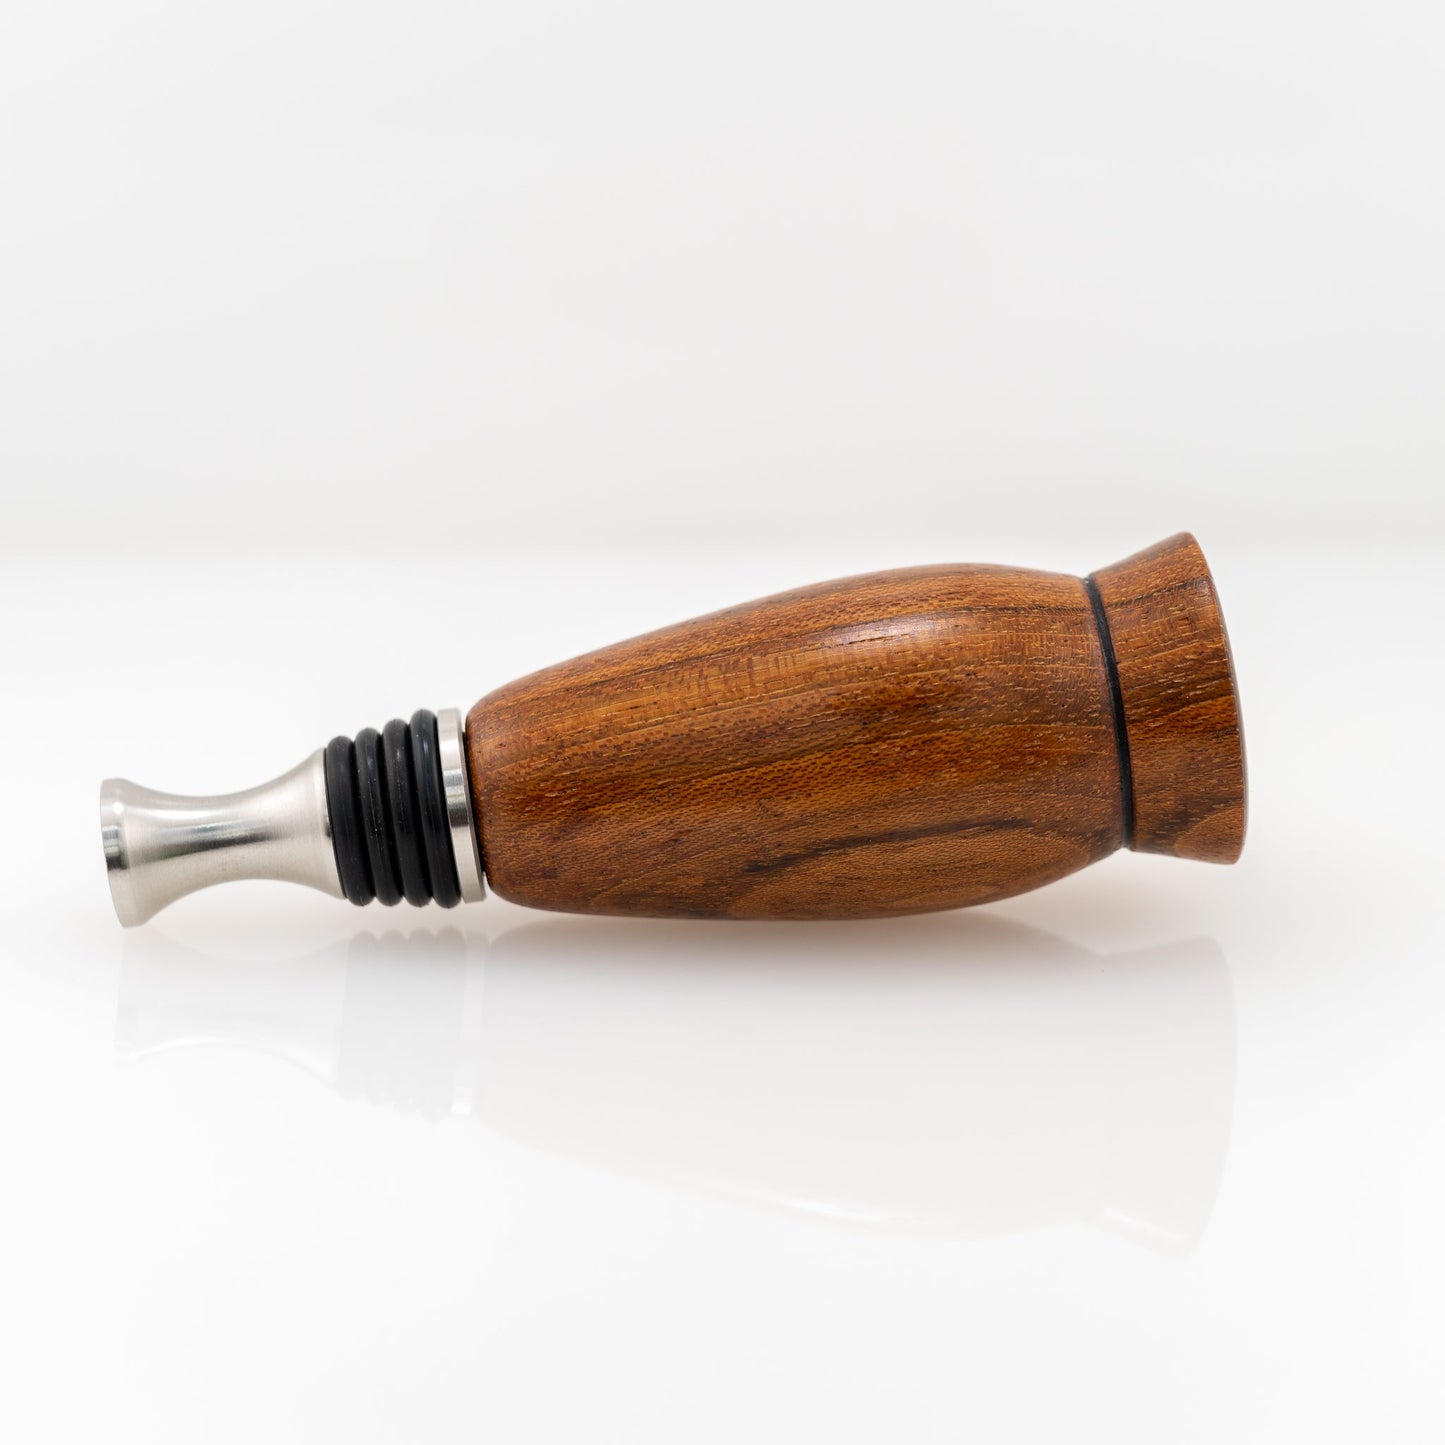 Handmade wood bottle stopper with purple resin topper and stainless steel bottom